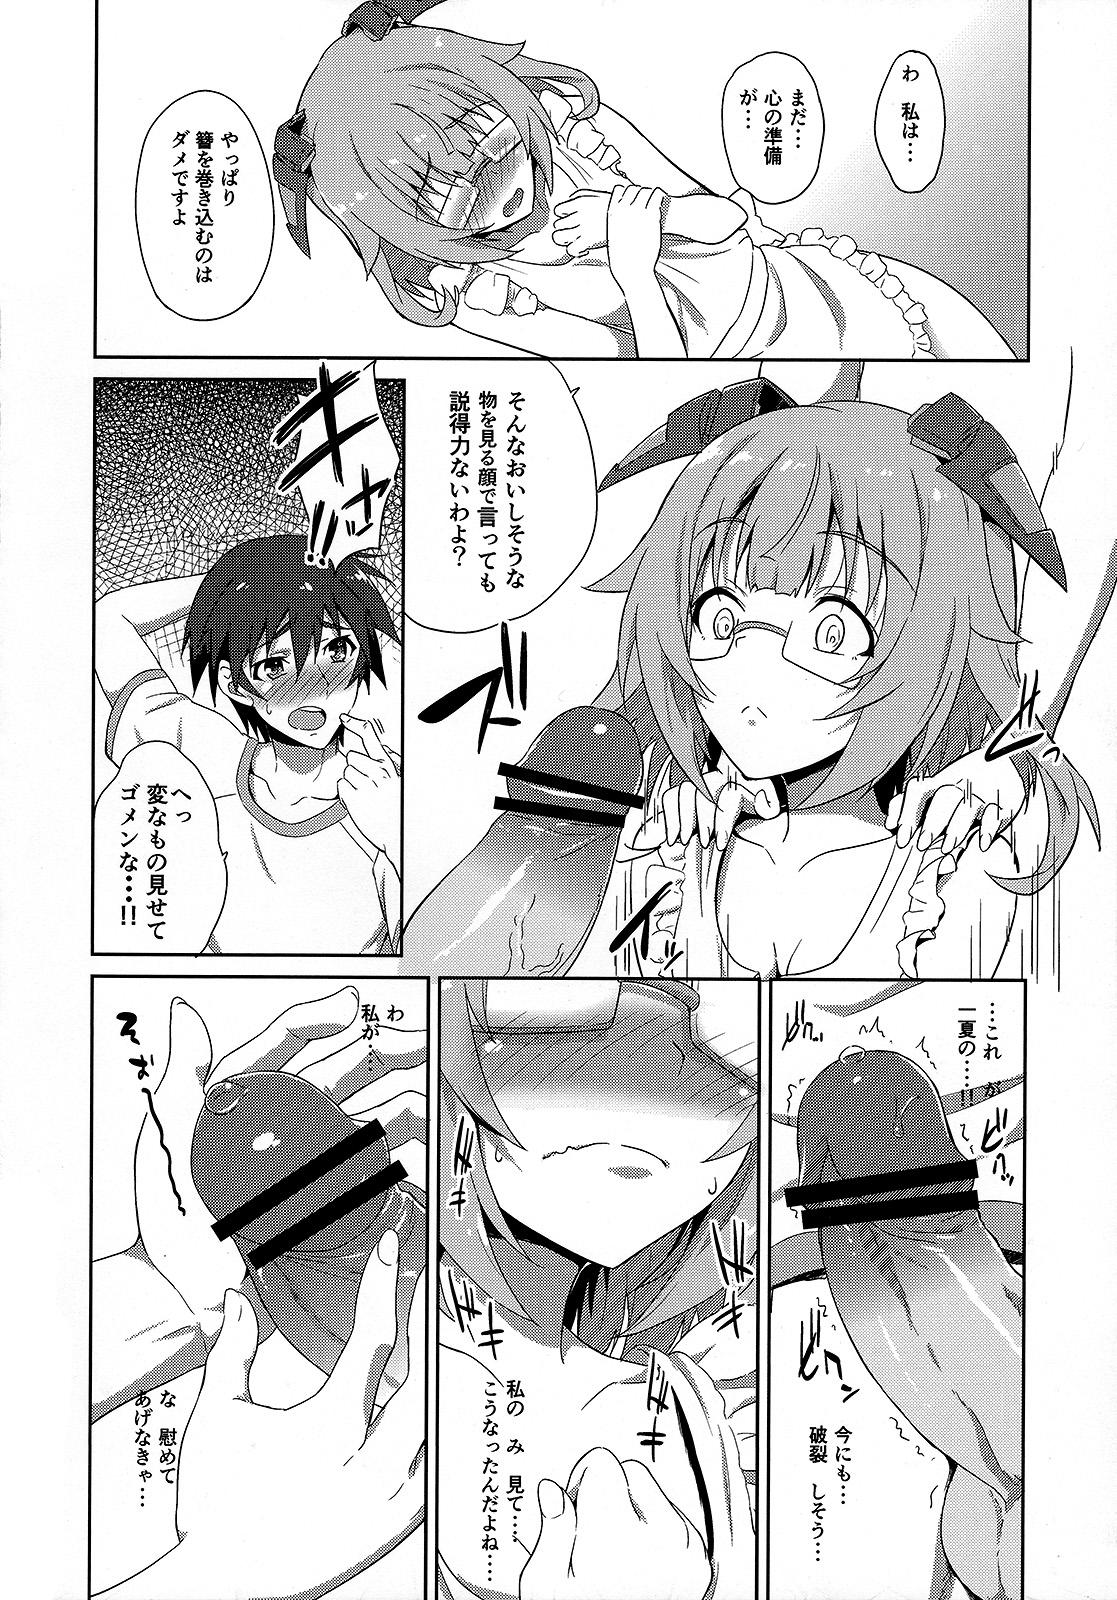 Pussy To Mouth IS ICHIKA LOVE SISTERS!! - Infinite stratos Pierced - Page 7